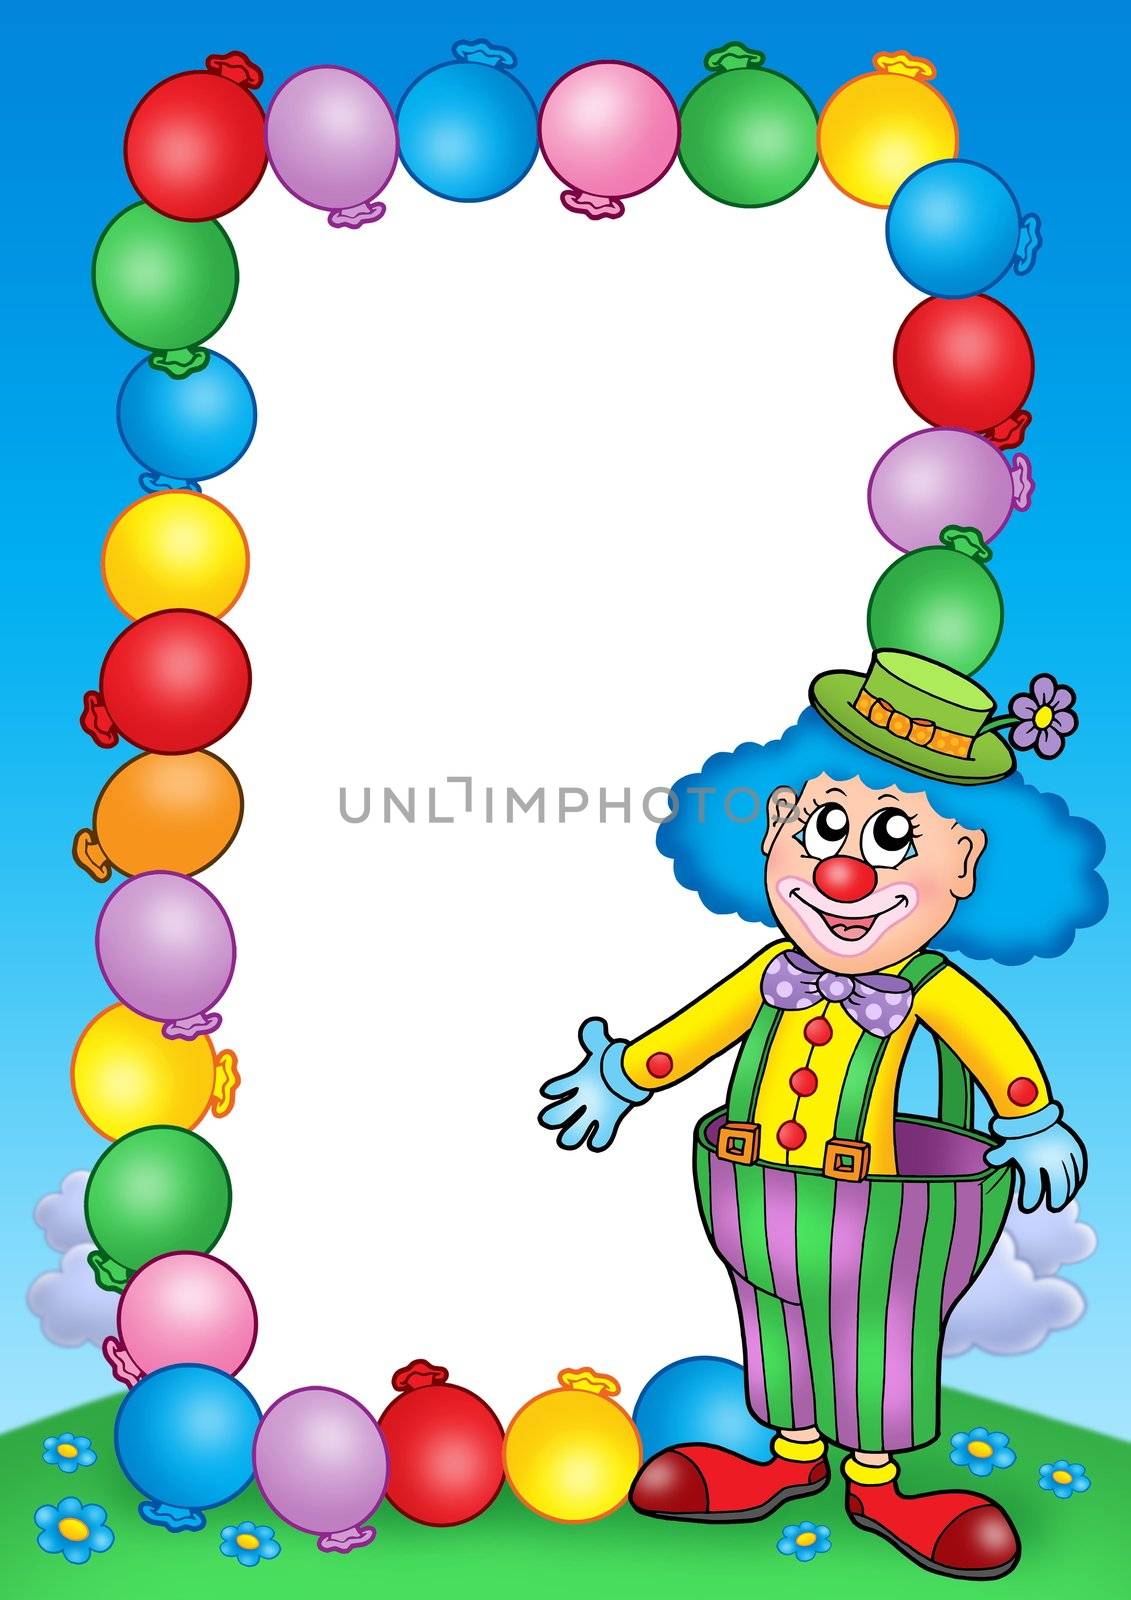 Party invitation frame with clown 7 by clairev